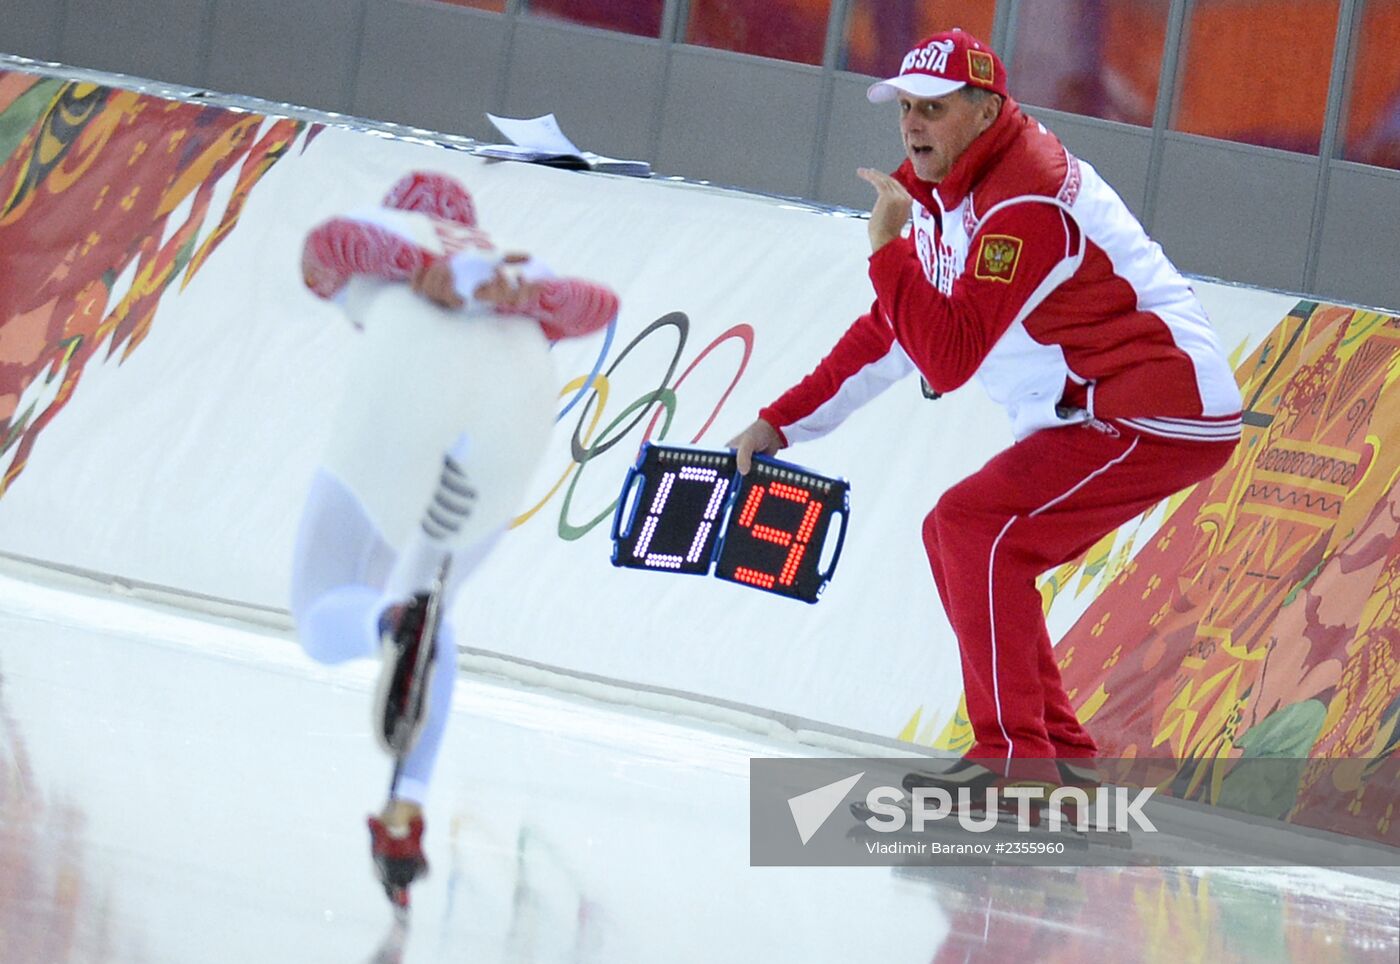 Winter Olympics 2014. Speed skating. Test events